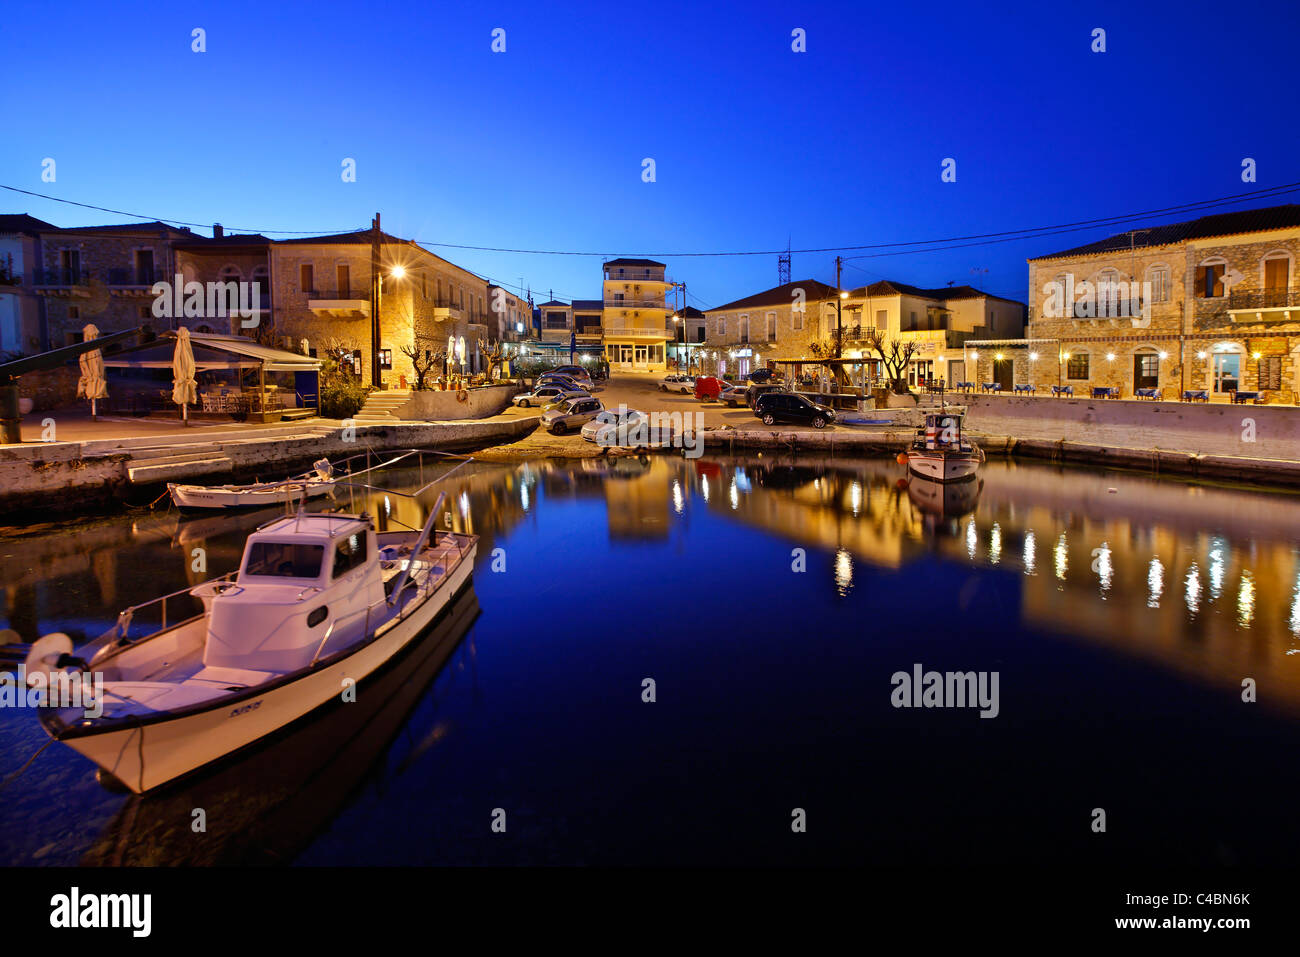 Partial view of the small harbor of Aghios Nikolaos (or "Selinitsa") village in Western ("Messinian") Mani, Peloponnese, Greece Stock Photo